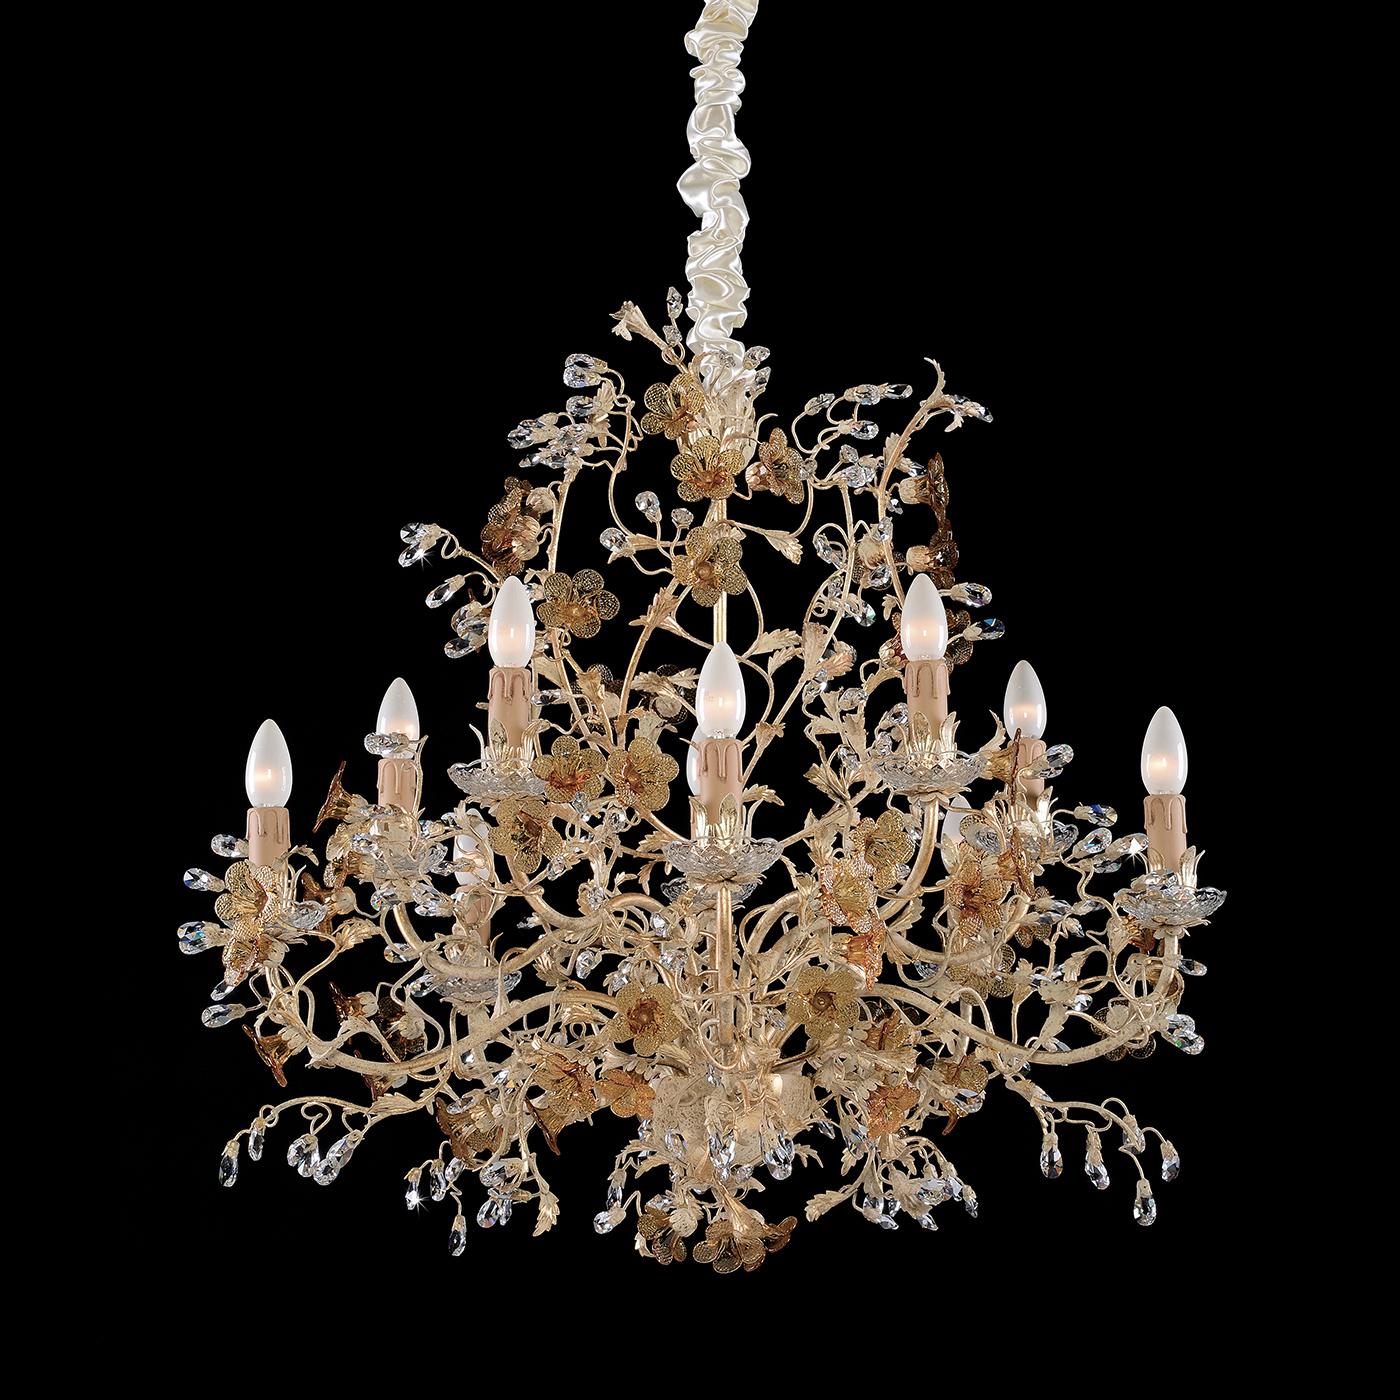 An exquisite testament to Italian know-how, this charming chandelier is inspired by natural forms. With an ivory lacquer finish, the chandelier is accented with gold leaf, giving it a warm look. The chandelier is completed by Asfour crystals and